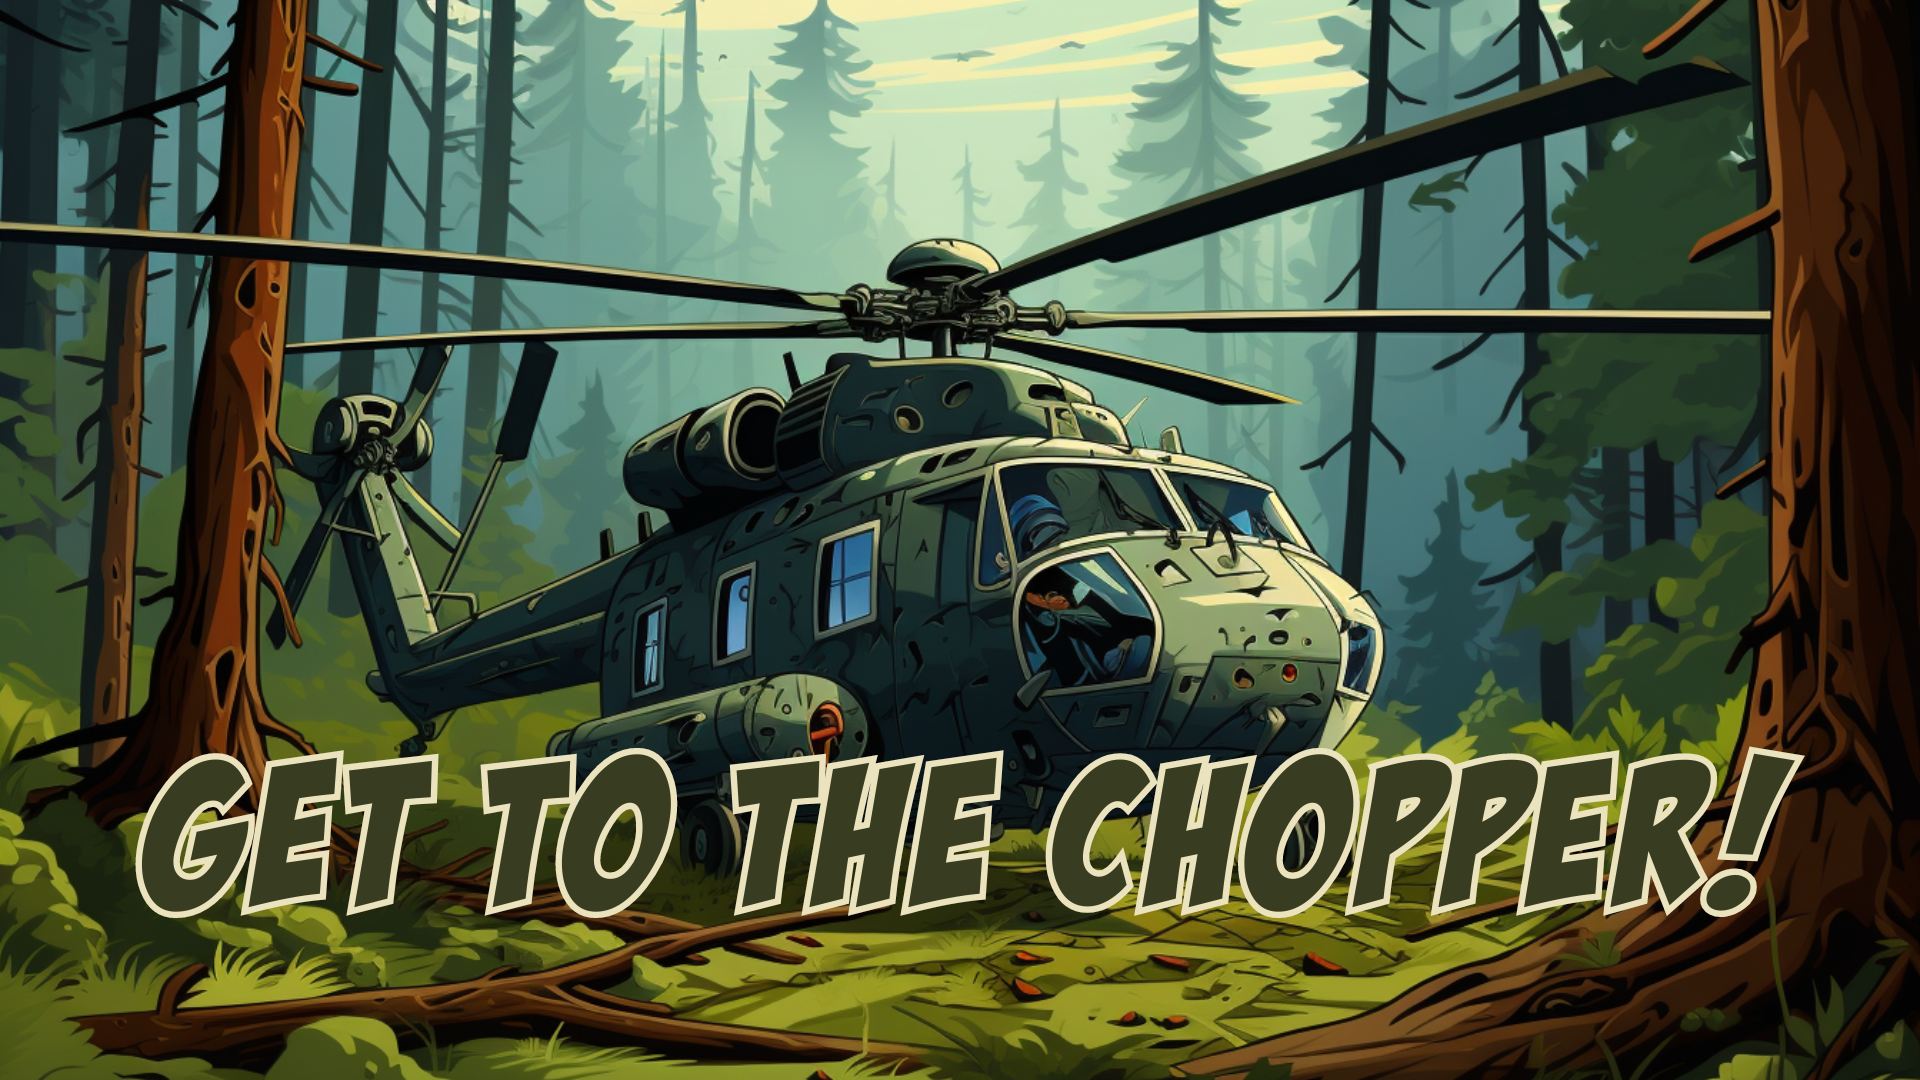 Get To The Chopper!